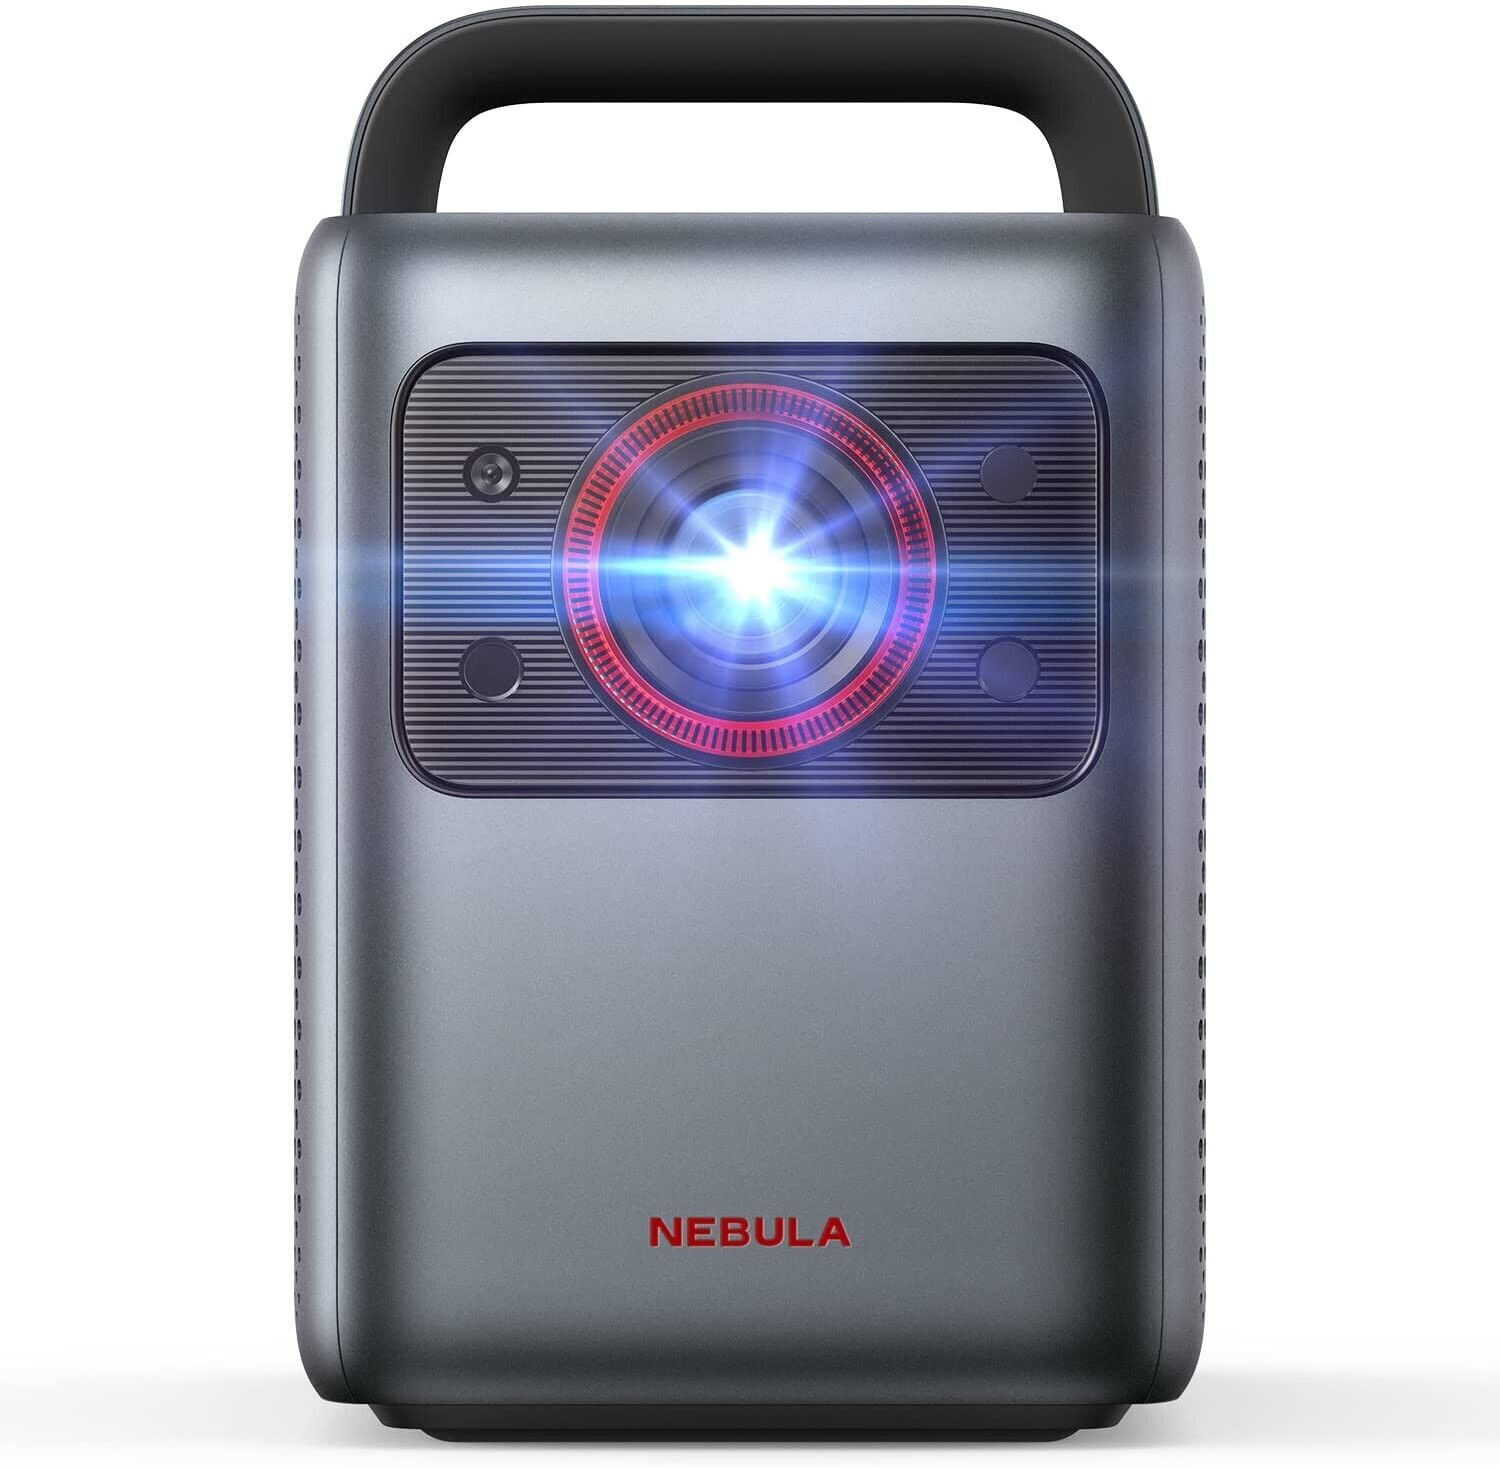 NEBULA Cosmos Laser Outdoor Projector, Android TV 10.0 with Dongle, Autofocus, Auto Keystone Correction, Screen Fit, Home Theater with Wi-Fi & Walmart.com